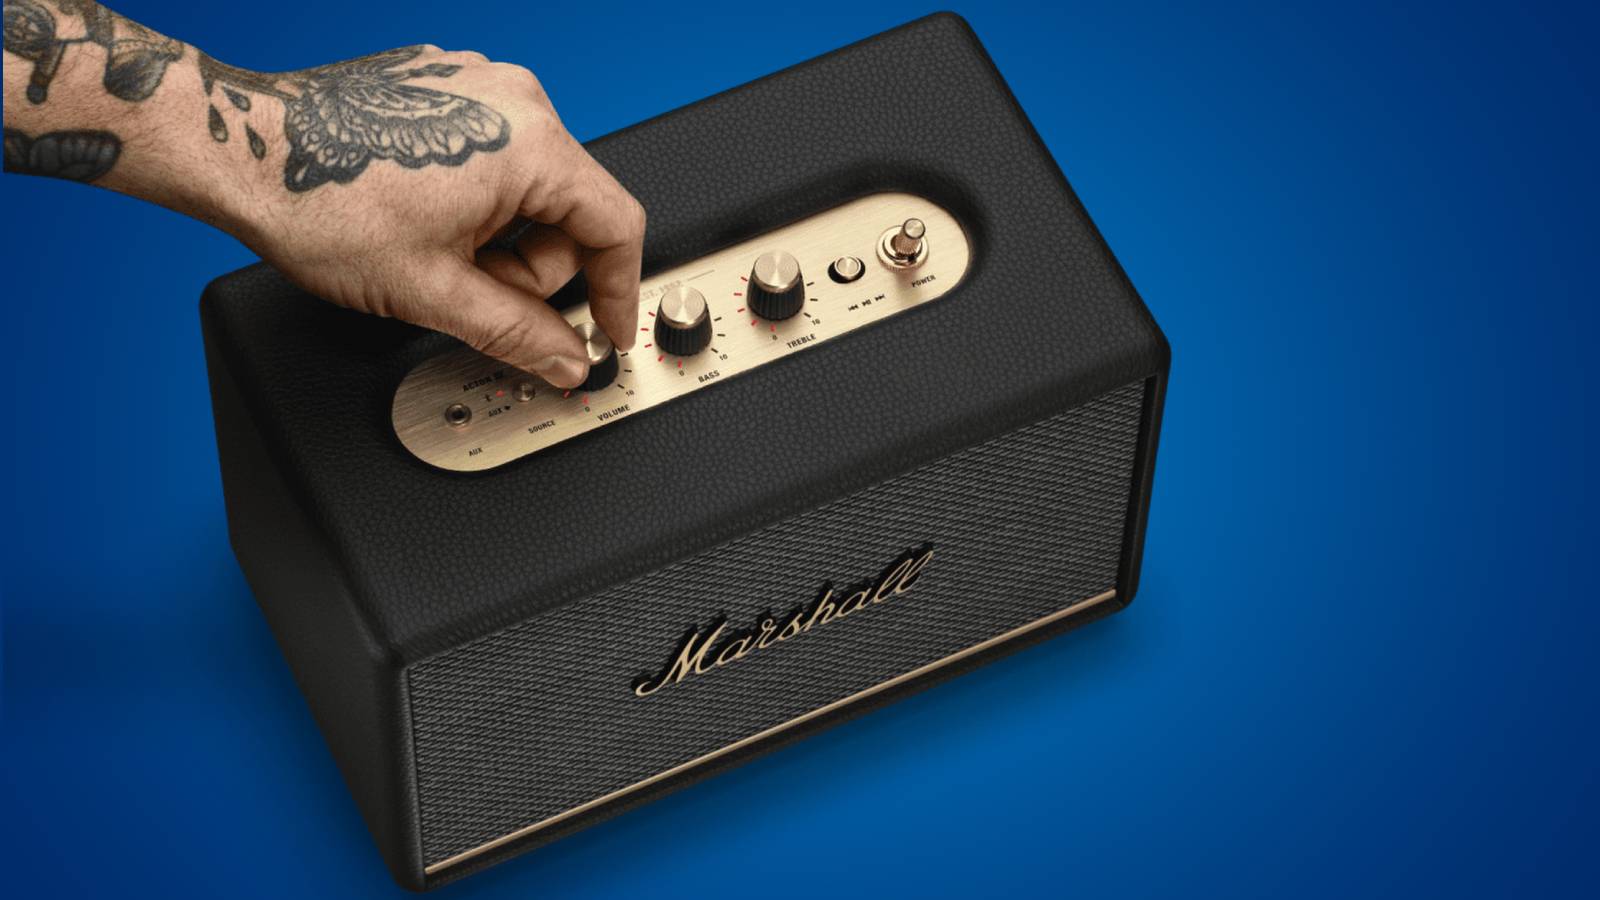 Pump up the volume with $100 off a Marshall Bluetooth speaker before Black  Friday - Dexerto